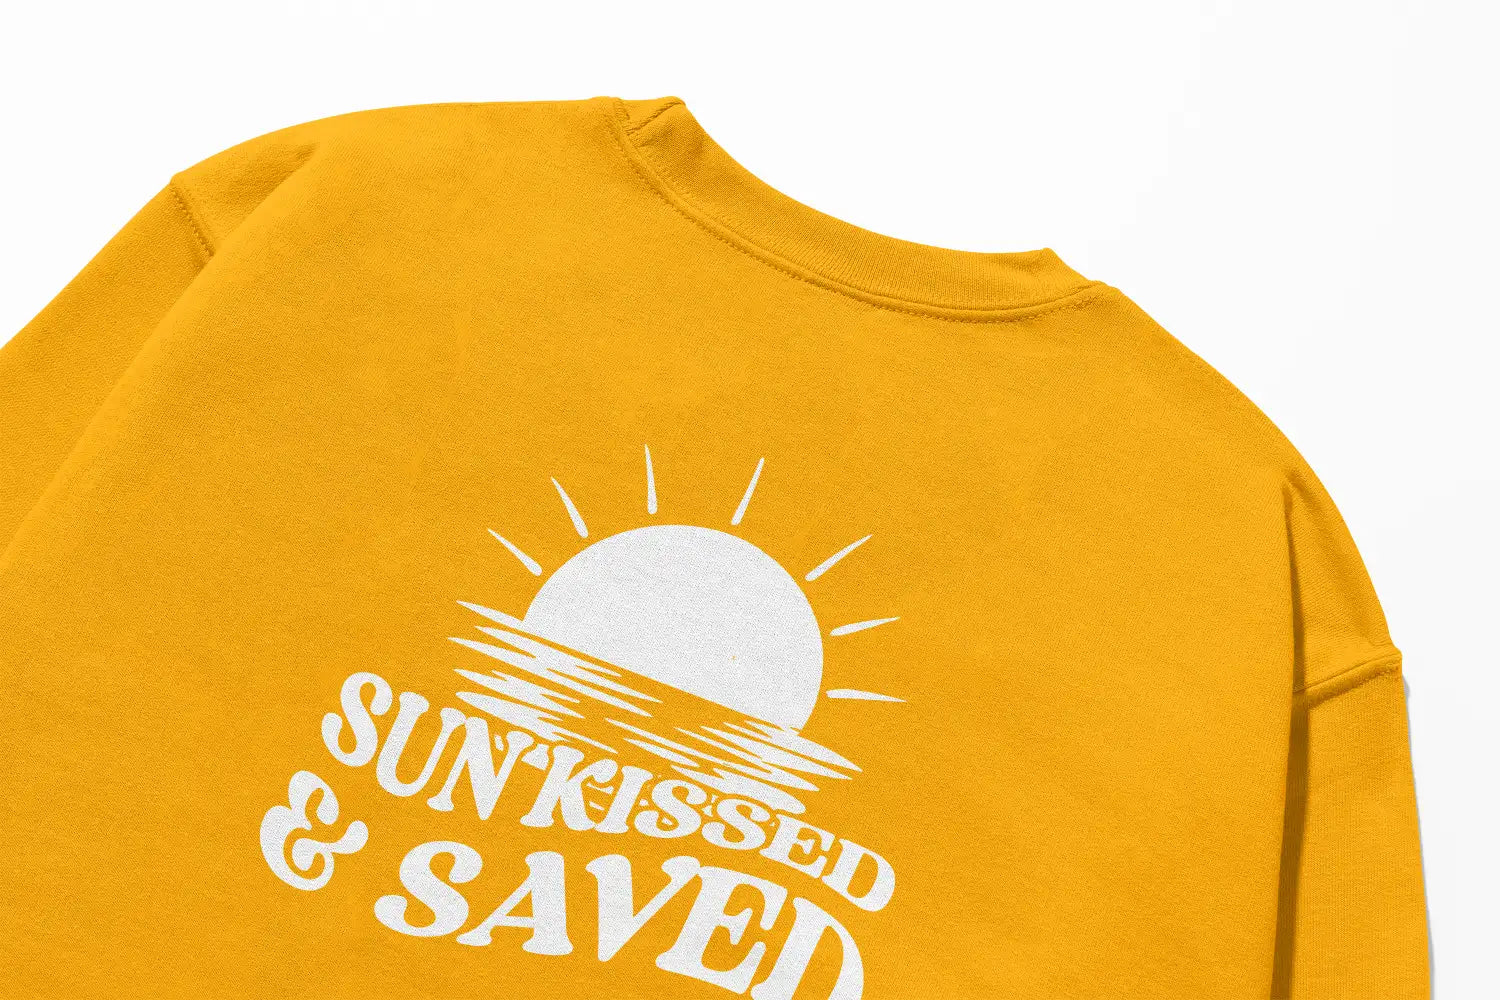 A warm yellow Sunkissed & Saved Sweatshirt that says "sun kissed" and brings faith, by Be Still and Know.